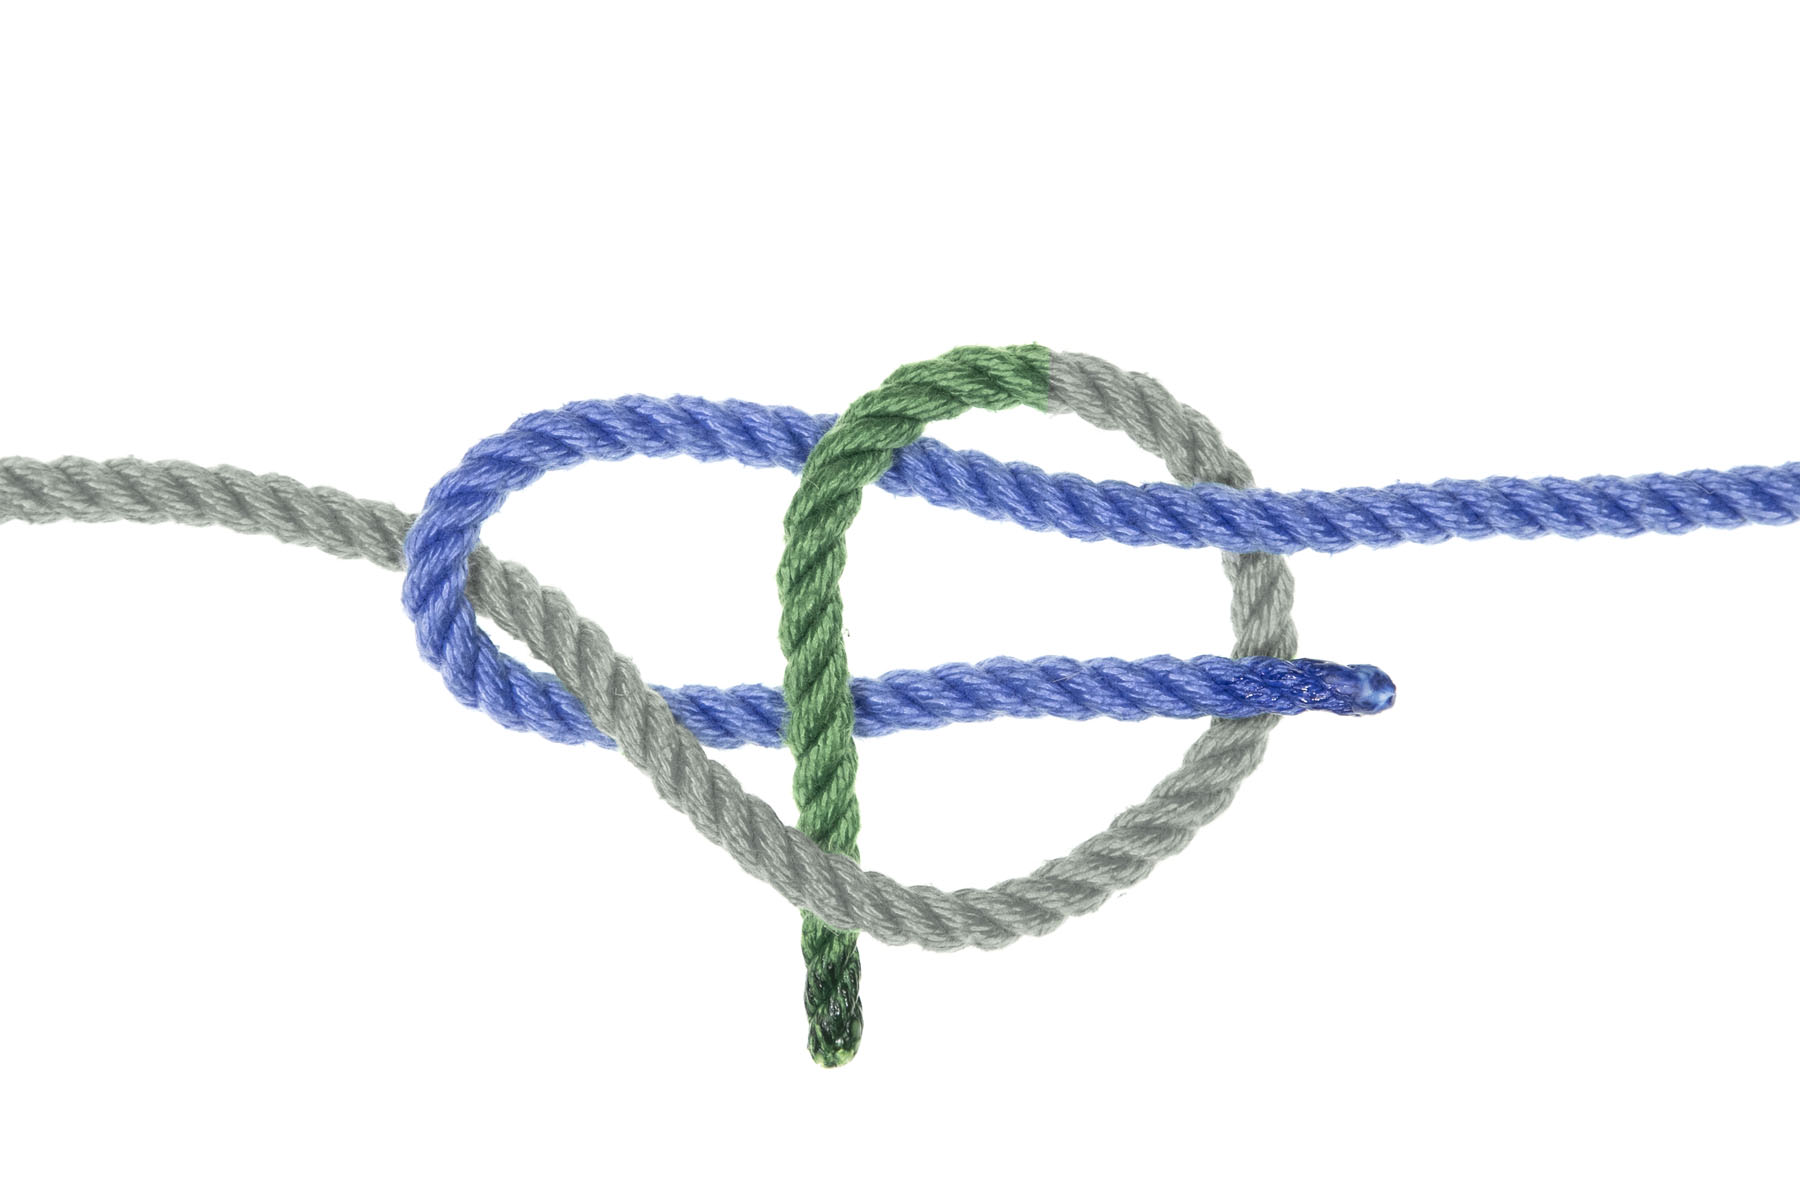 The green rope bends to the right and then down, crossing over both parts of the blue rope and then under itself.